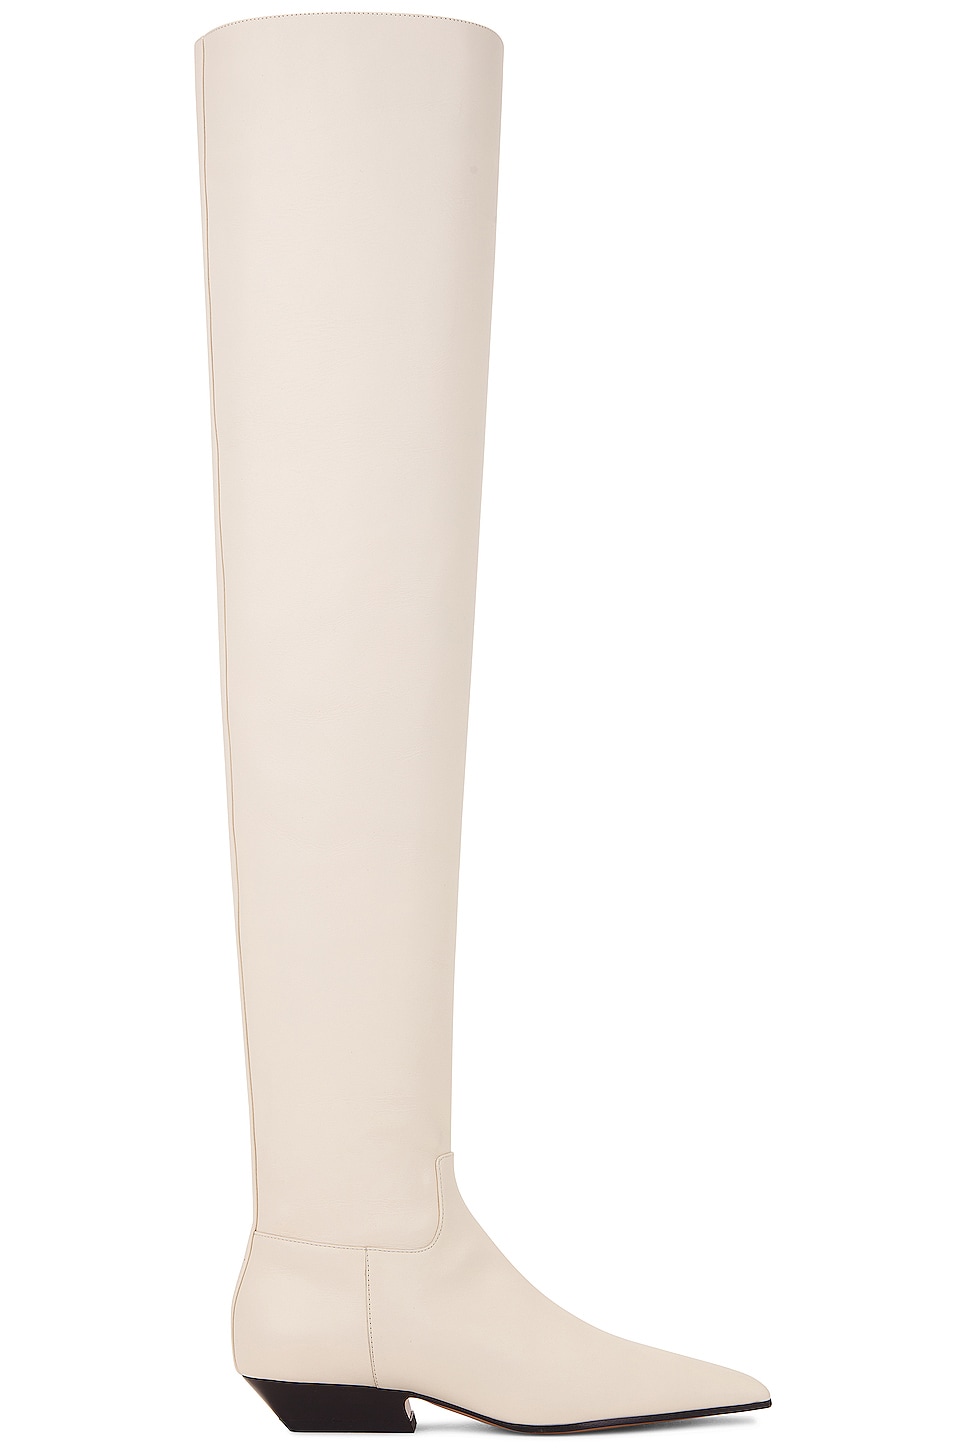 Marfa Classic Flat Over The Knee Boot in White